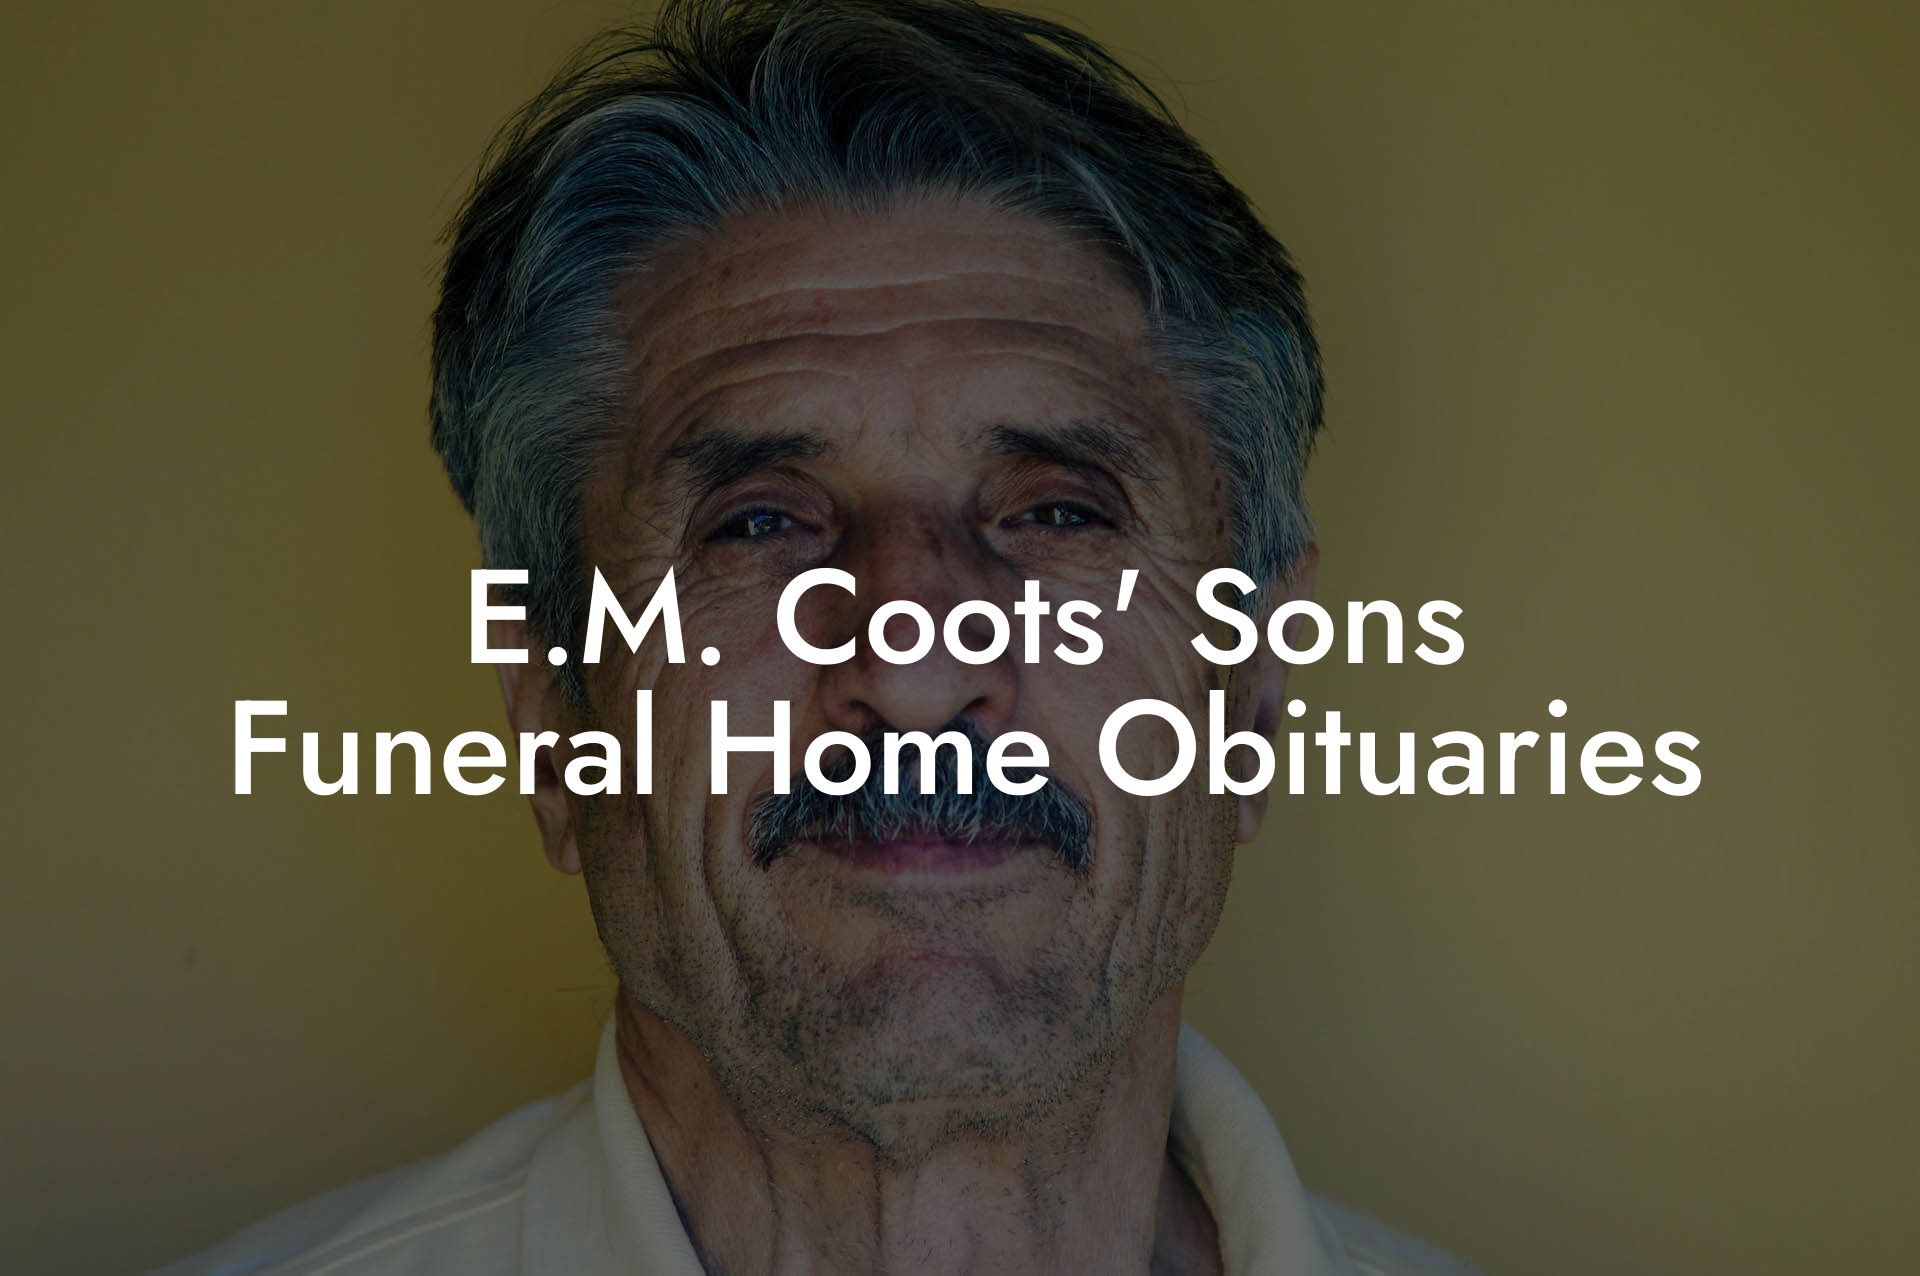 E.M. Coots' Sons Funeral Home Obituaries